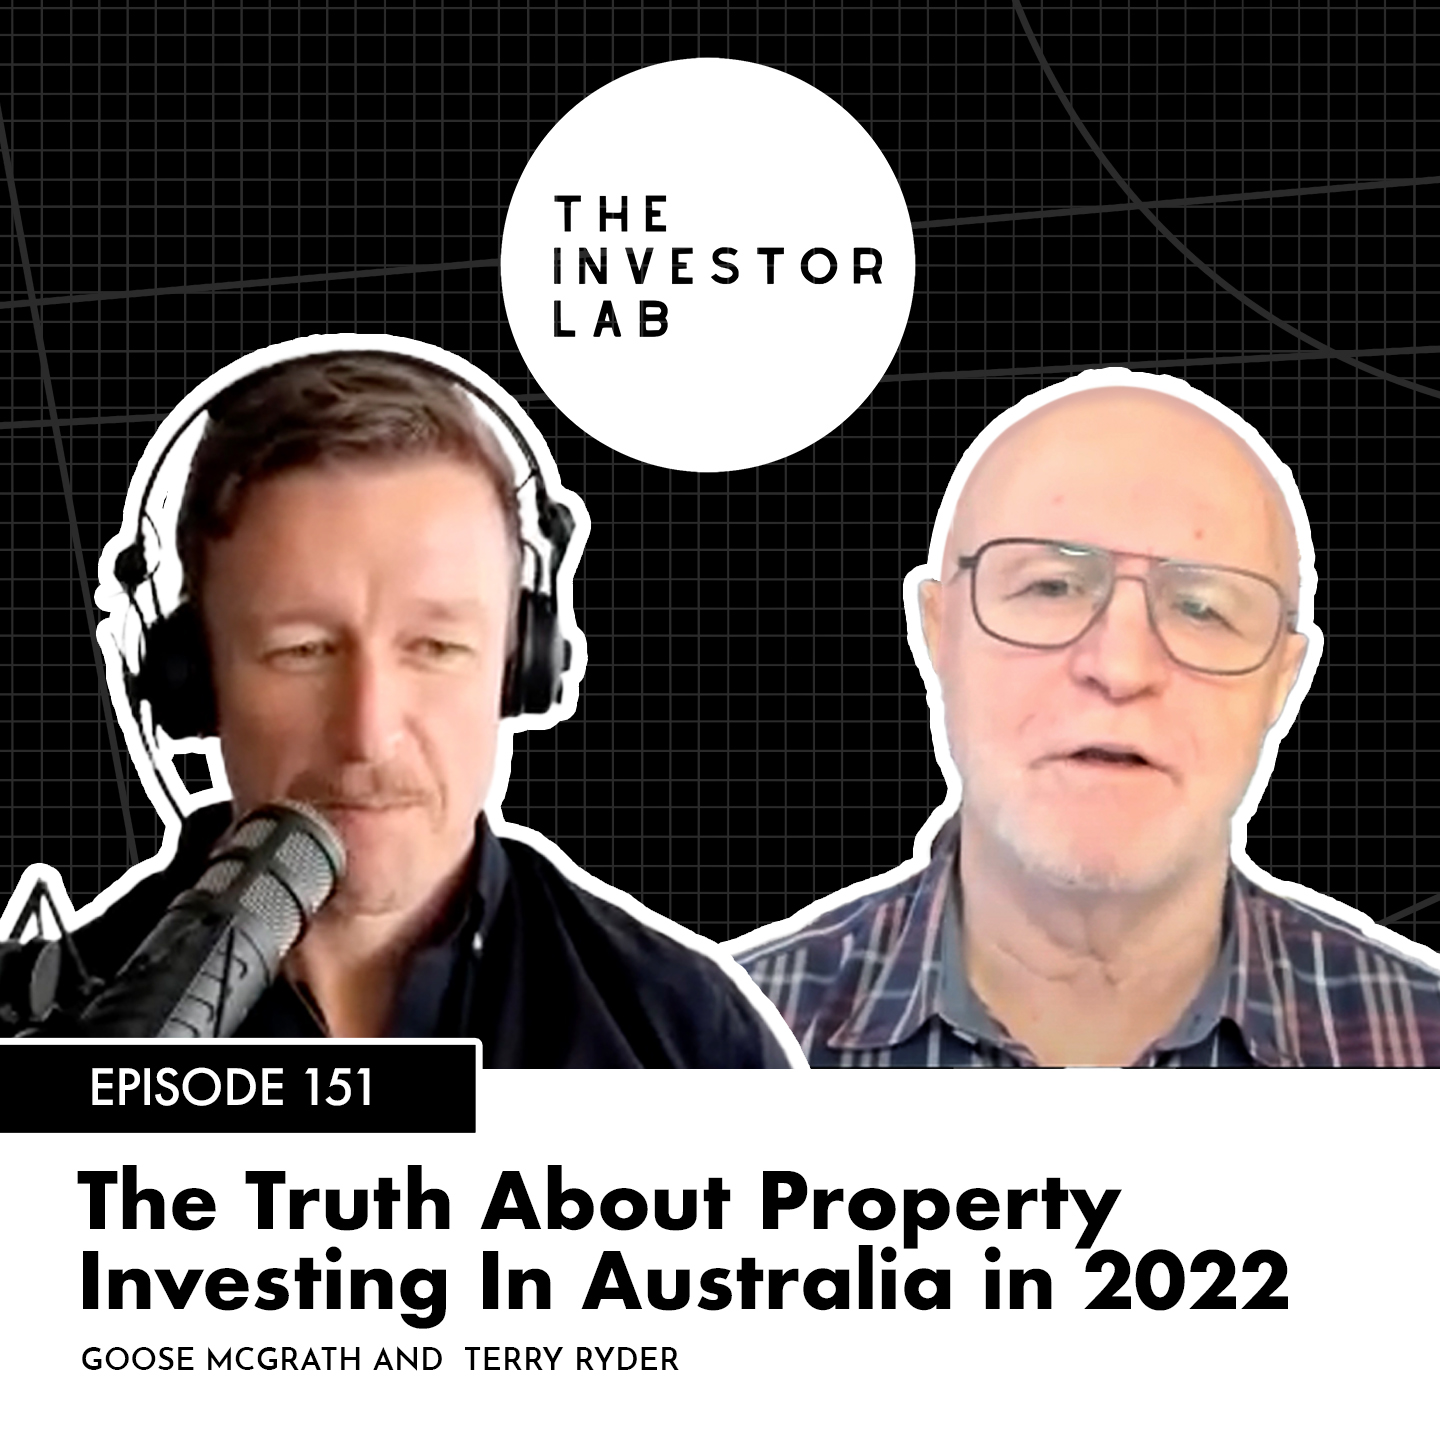 The Truth About Property Investing In Australia in 2022 with Terry Ryder